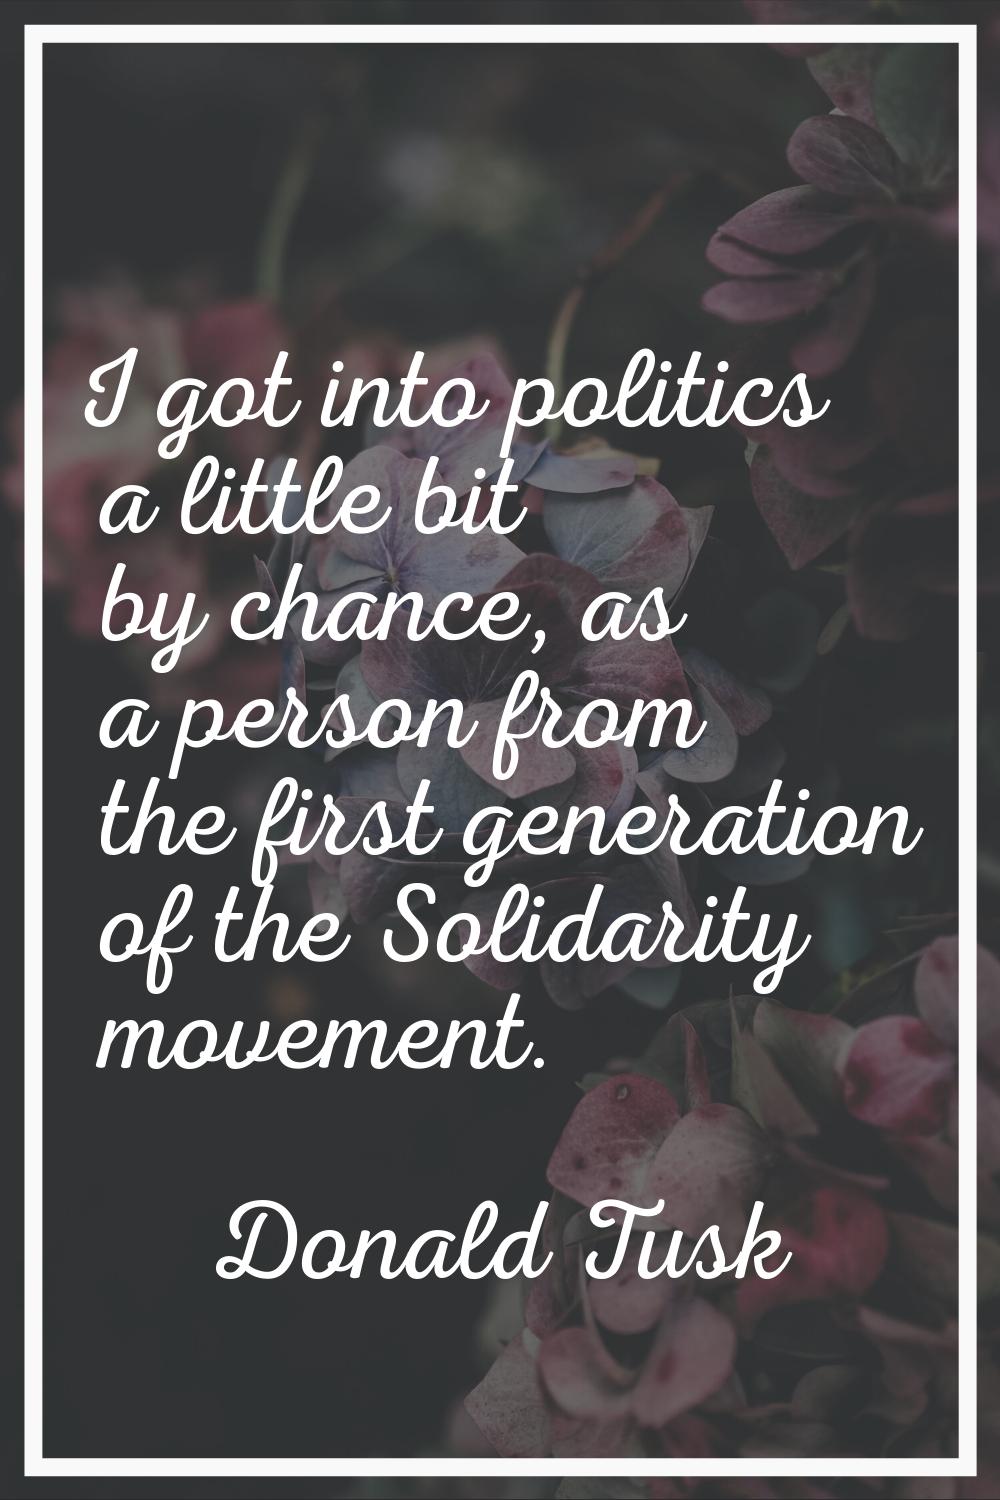 I got into politics a little bit by chance, as a person from the first generation of the Solidarity